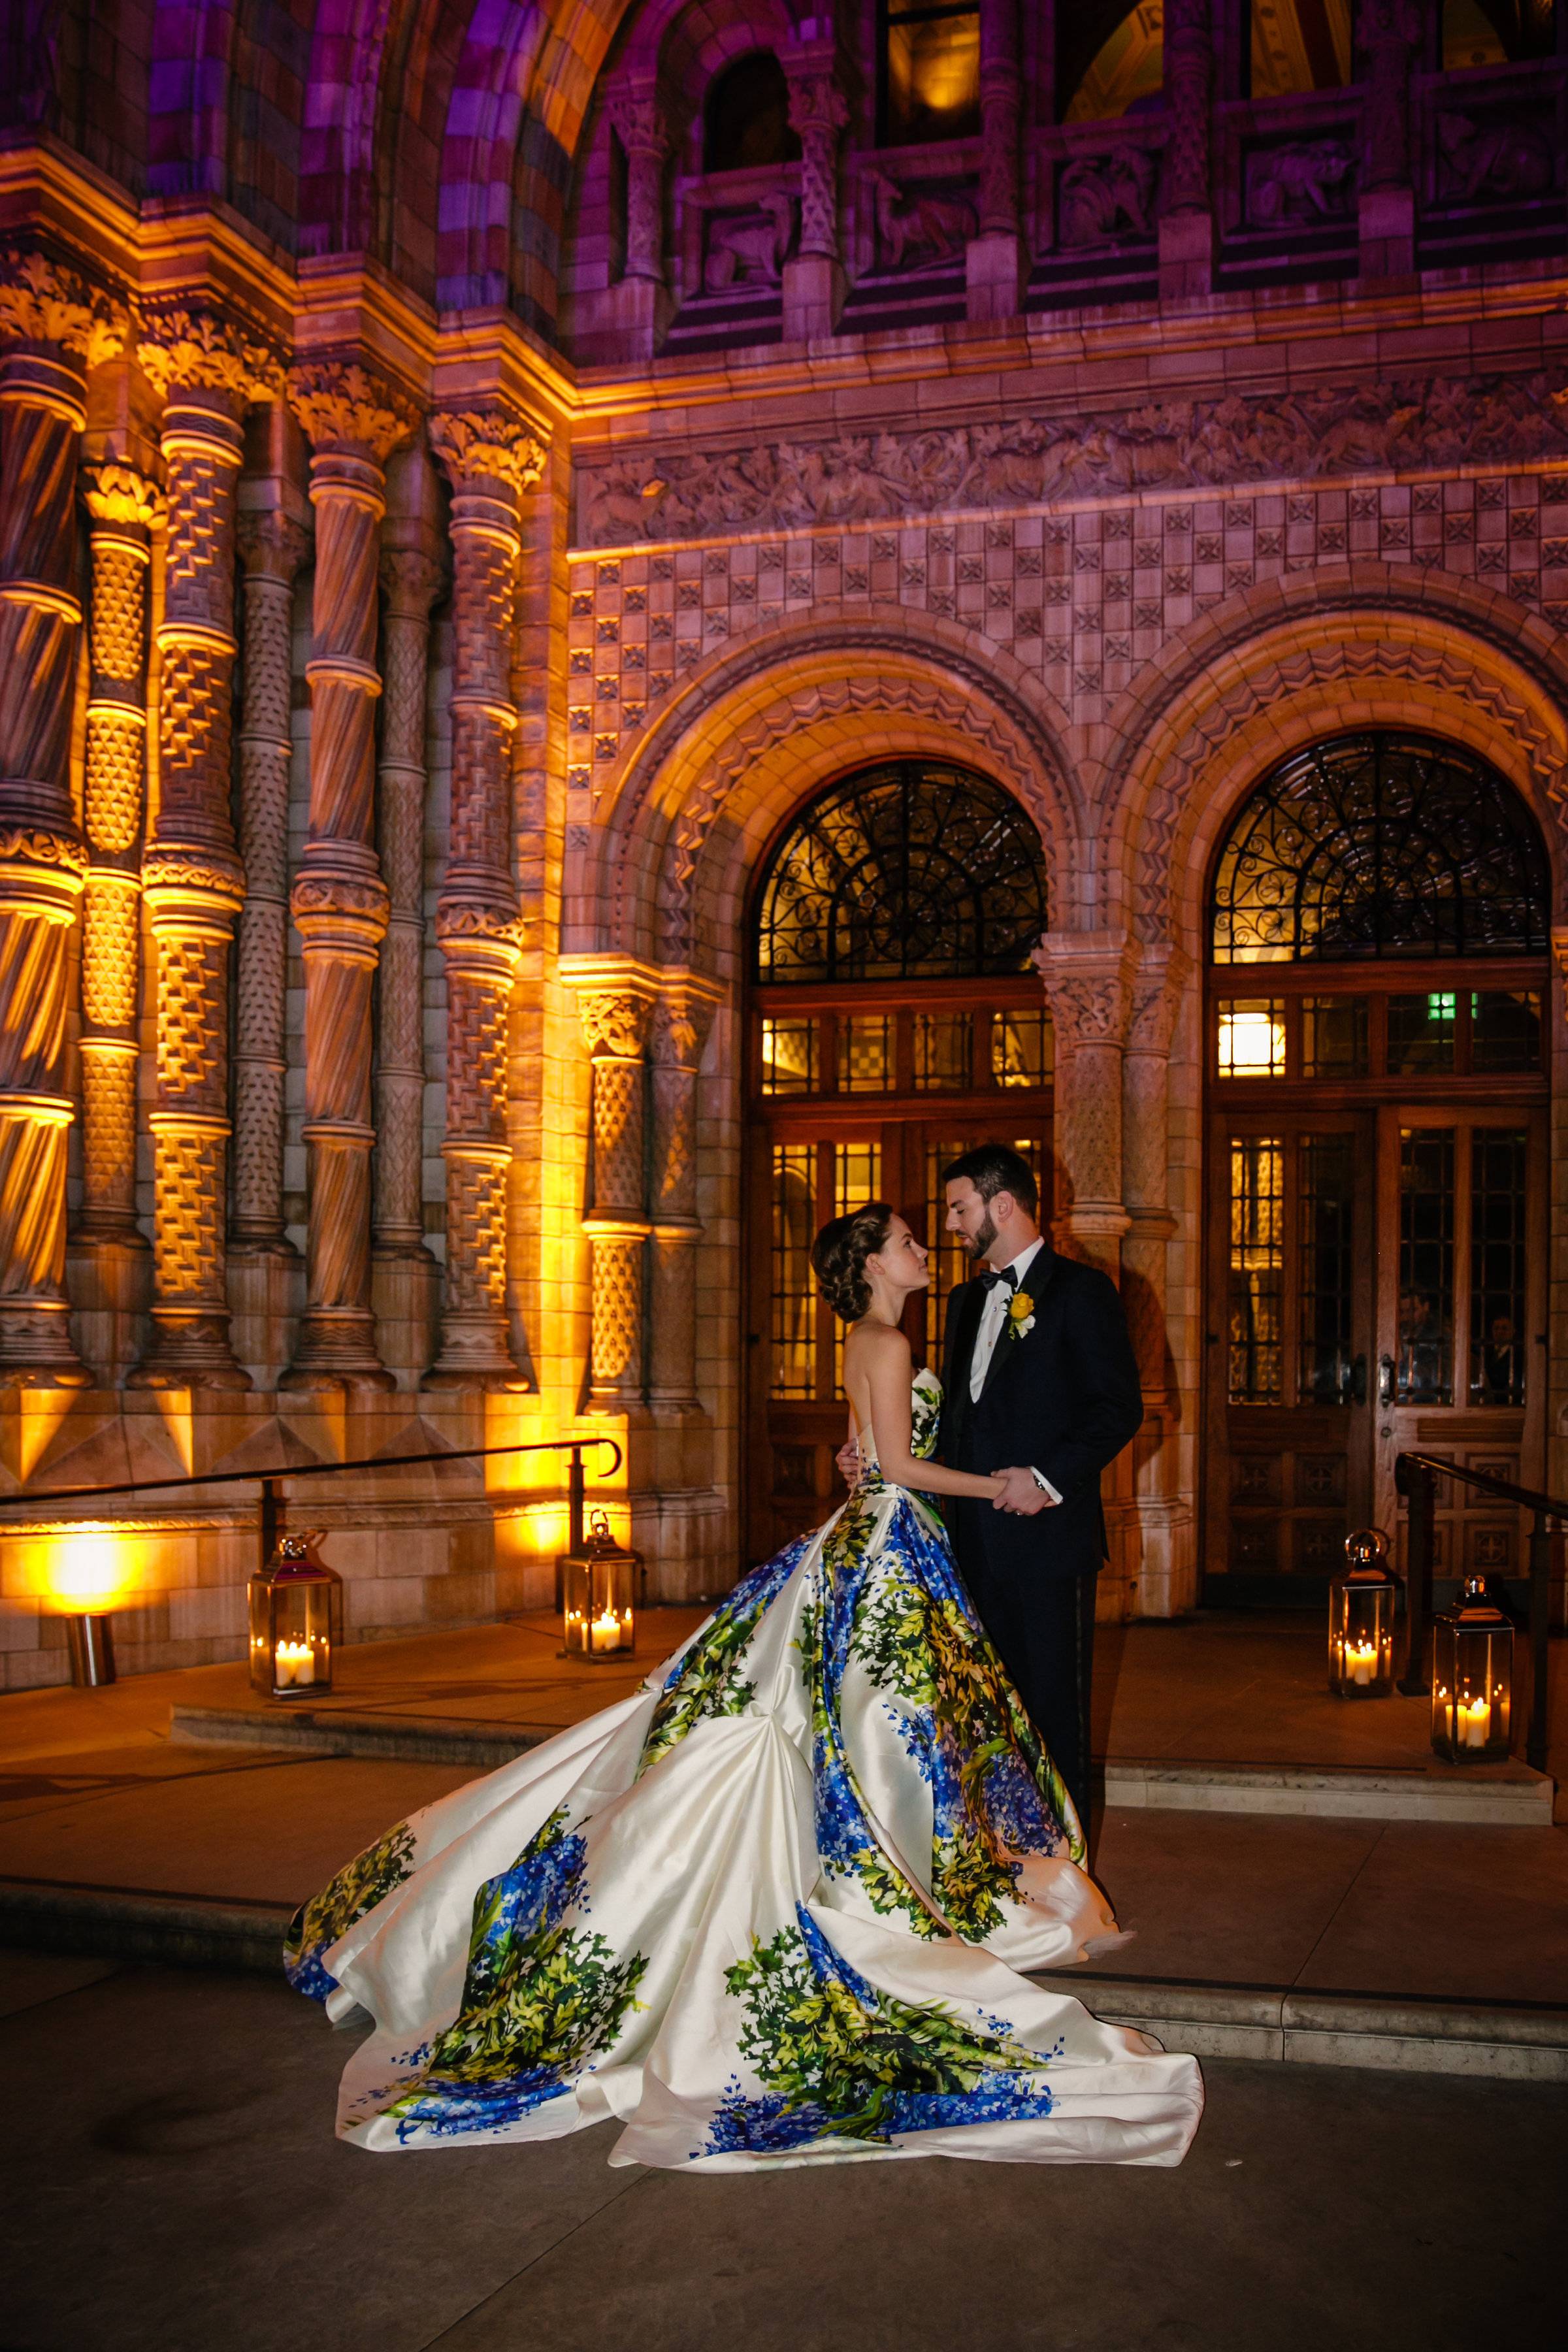 Weddings at The Wallace collection London